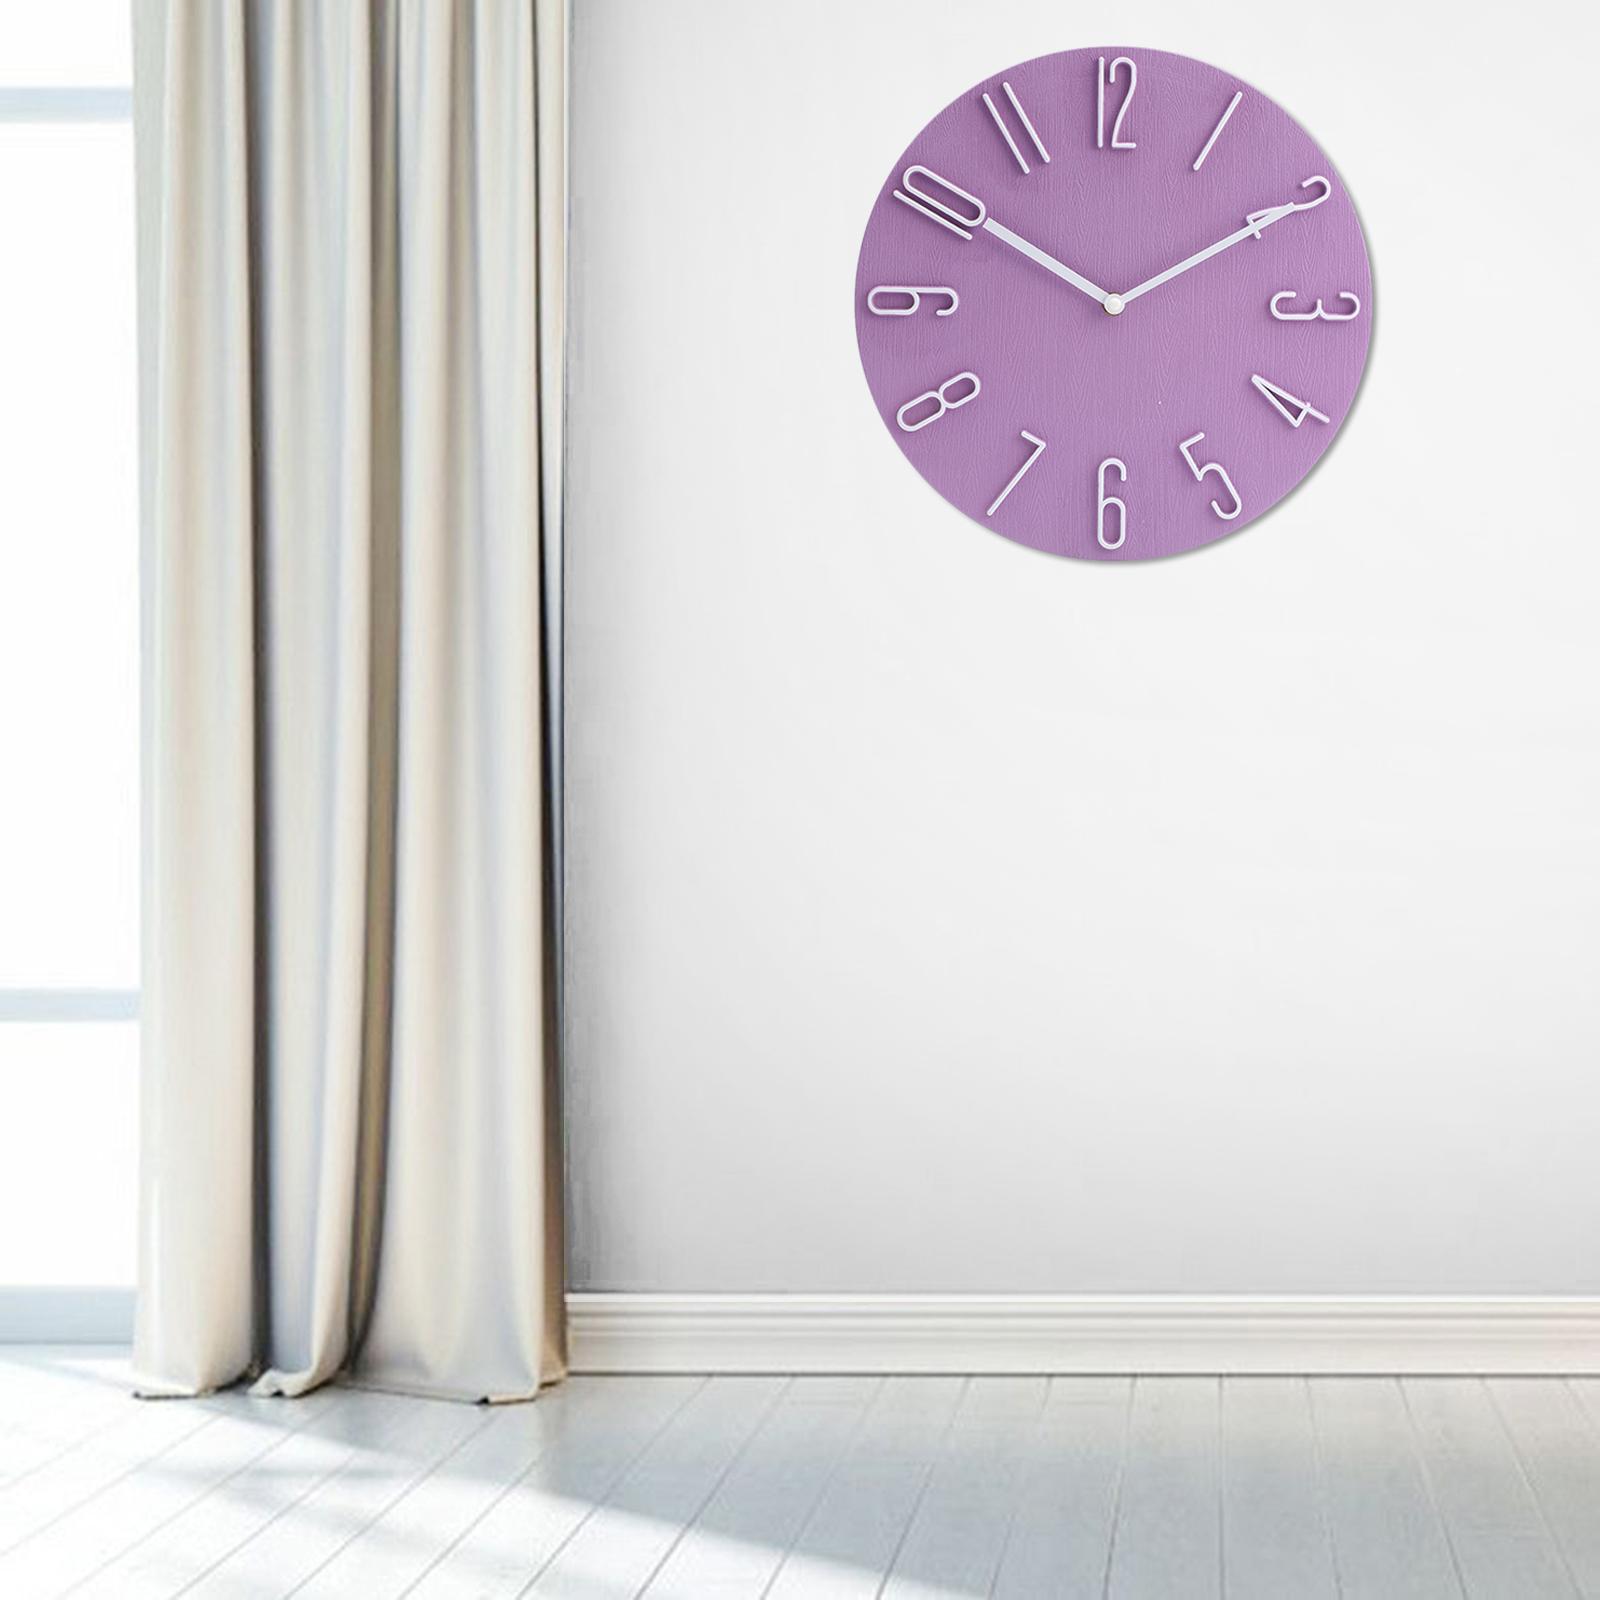 Large 30cm Clock Solid Color Numeral Indoor Office Wall Round Modern Purple